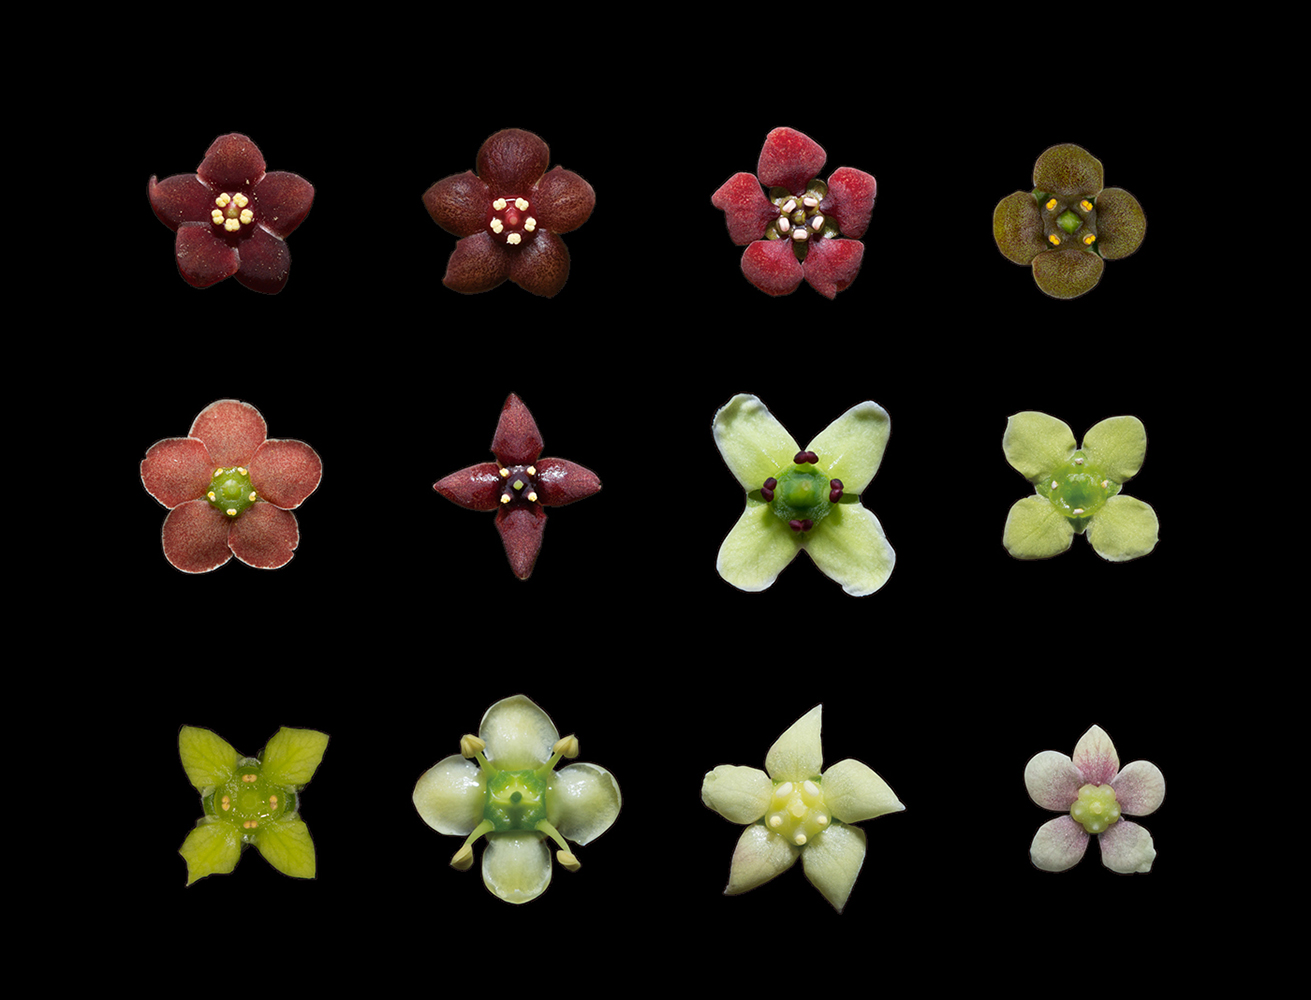 A selection of 12 flowers from the Euonymus group, exhibiting different shapes and colors. 